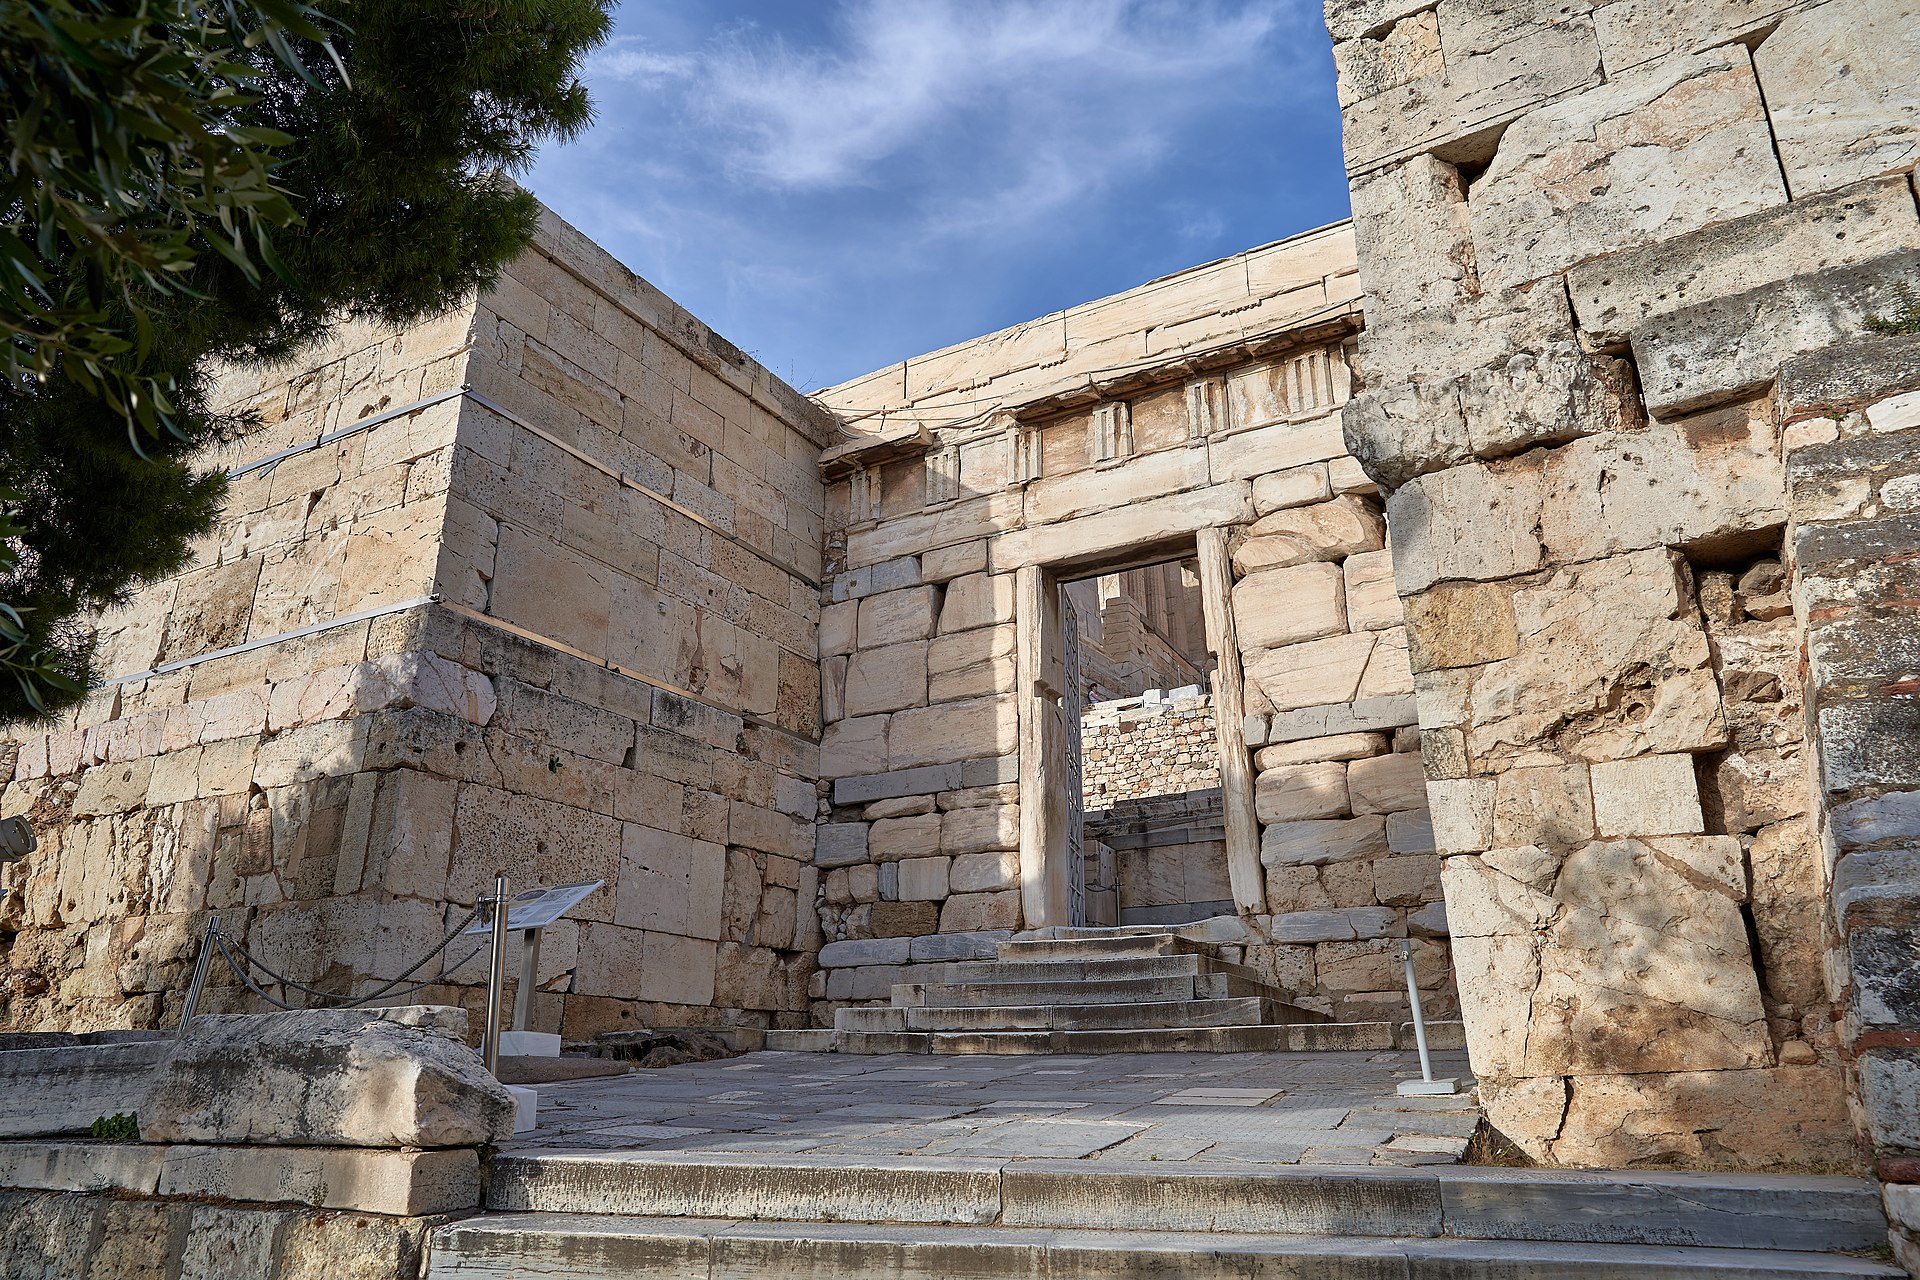 A Guide to the Acropolis, the Sacred Rock of Athens